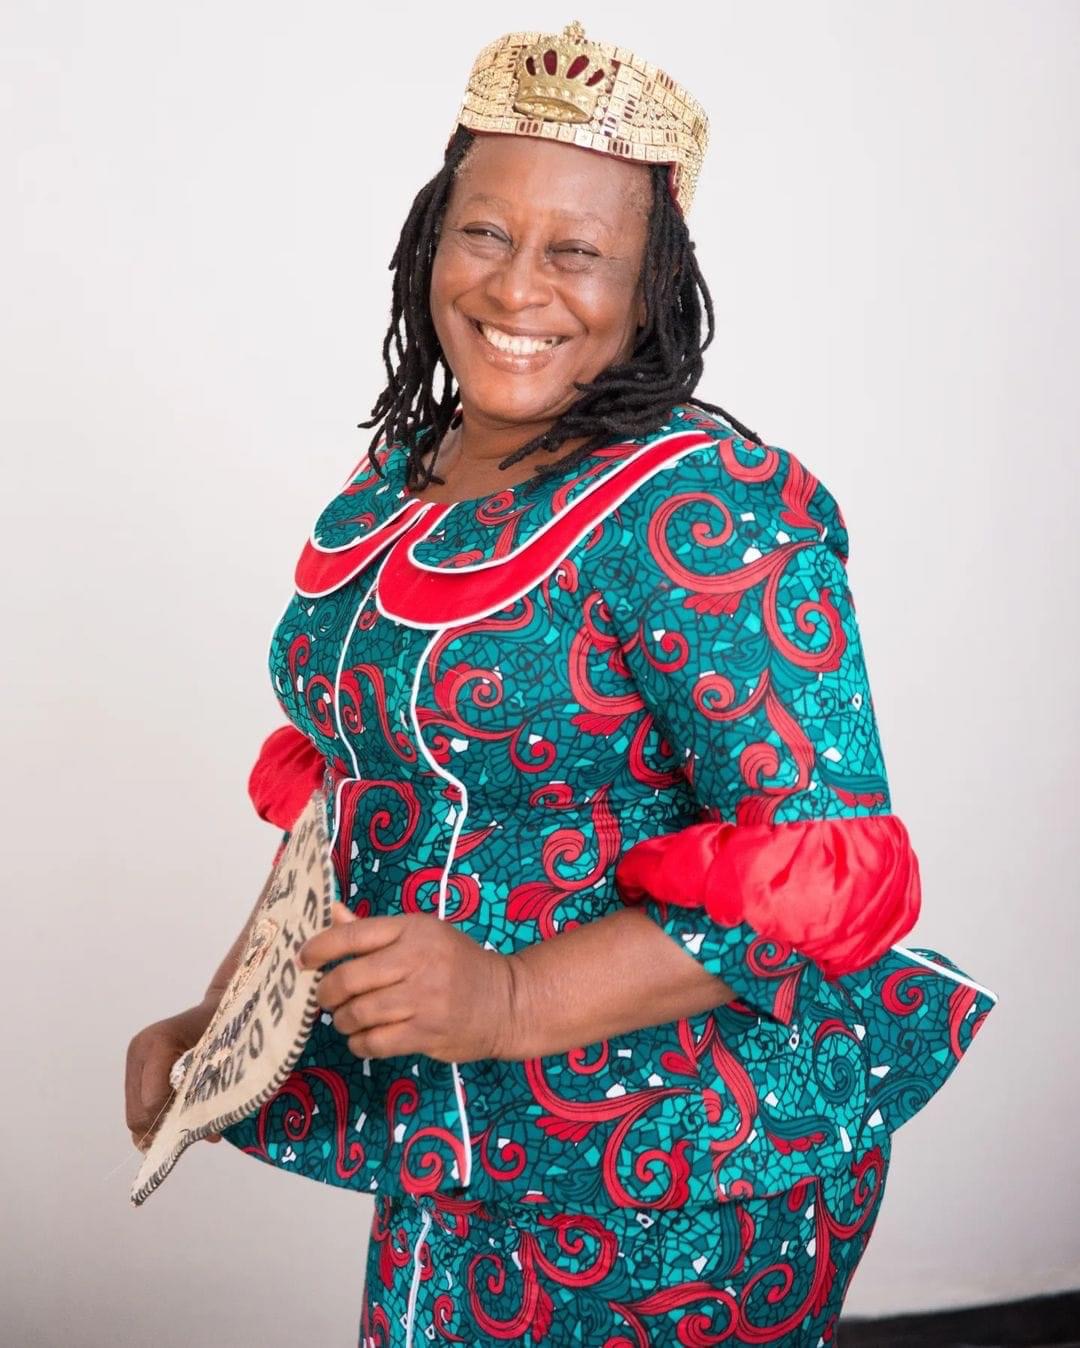 Africa Legend, Patience Ozonowo Popularly known as Mama G has Left an indelible mark in the Industry